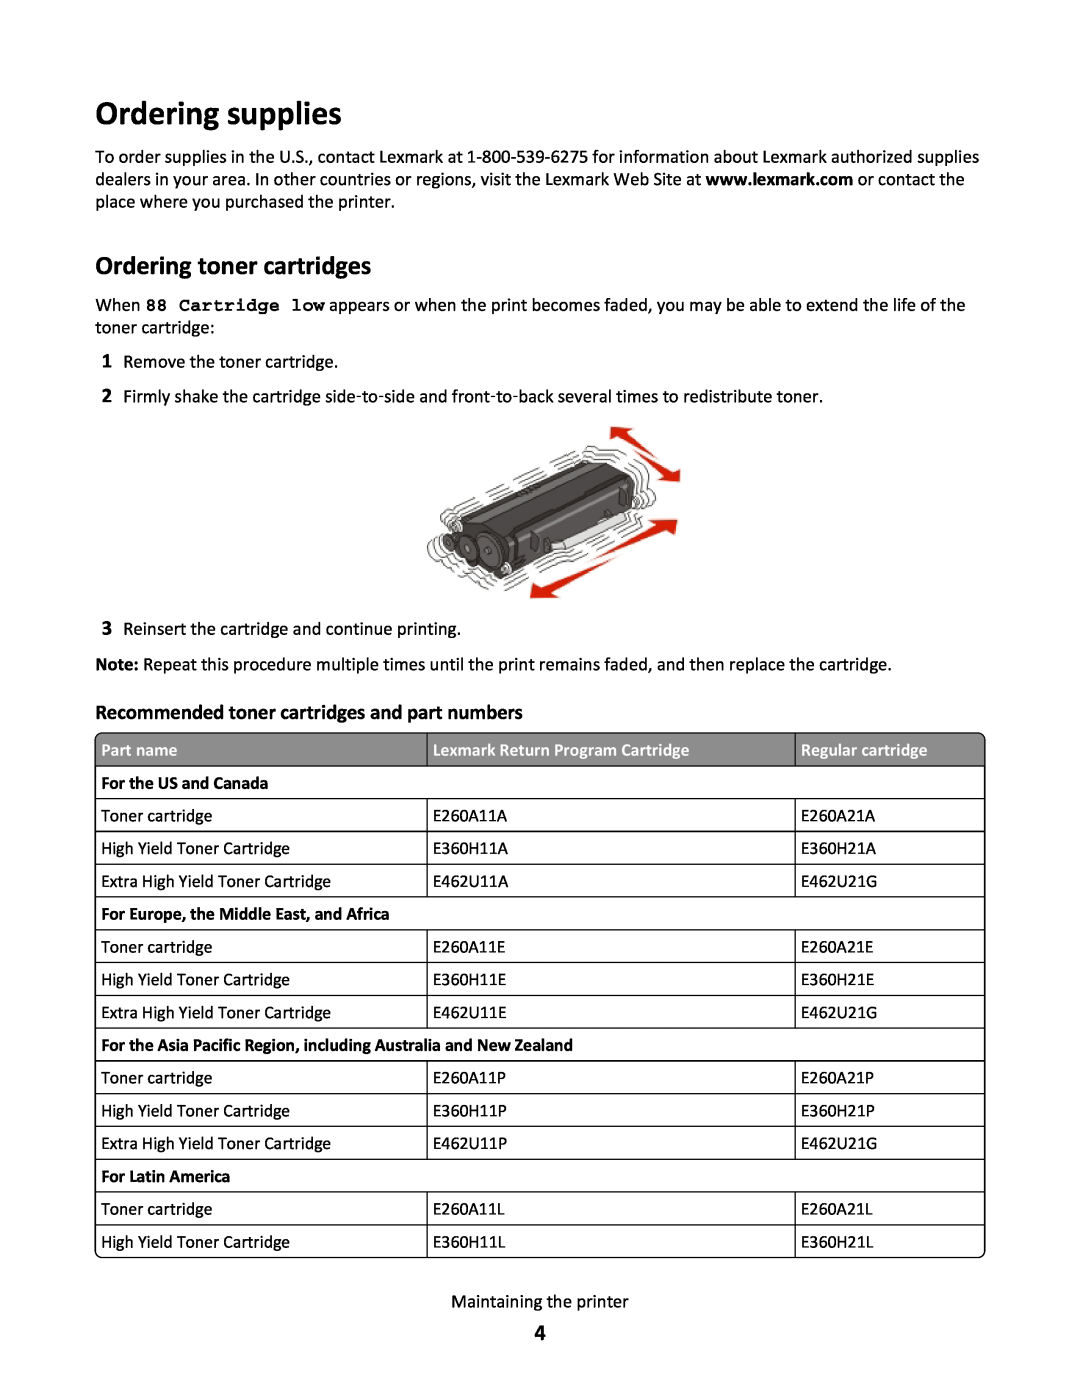 Lexmark 34S0700, 34S0705 manual Ordering supplies, Ordering toner cartridges, Recommended toner cartridges and part numbers 